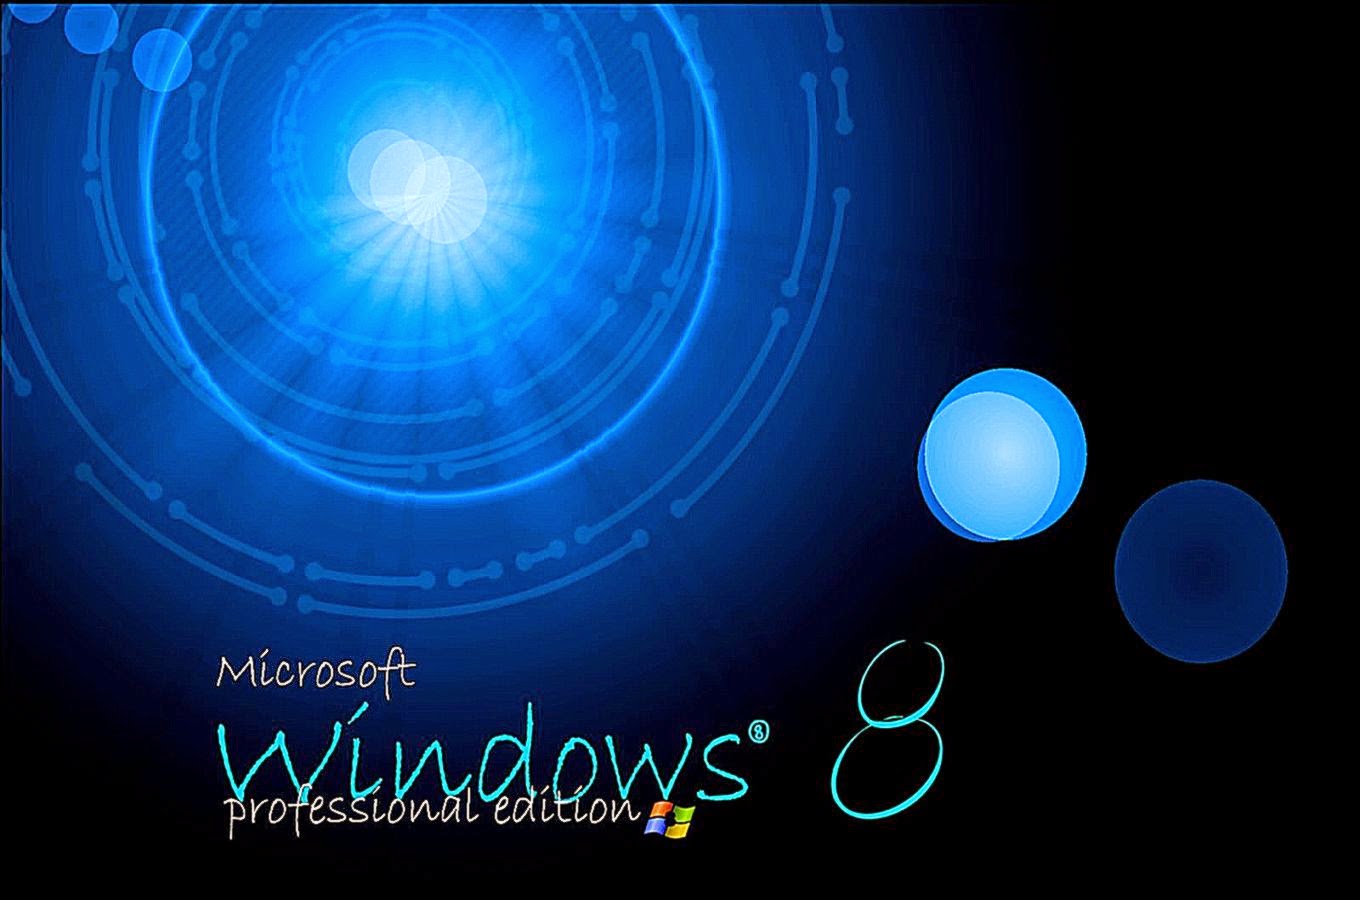 Animated Wallpaper Windows 8 1 | Free HD Wallpapers